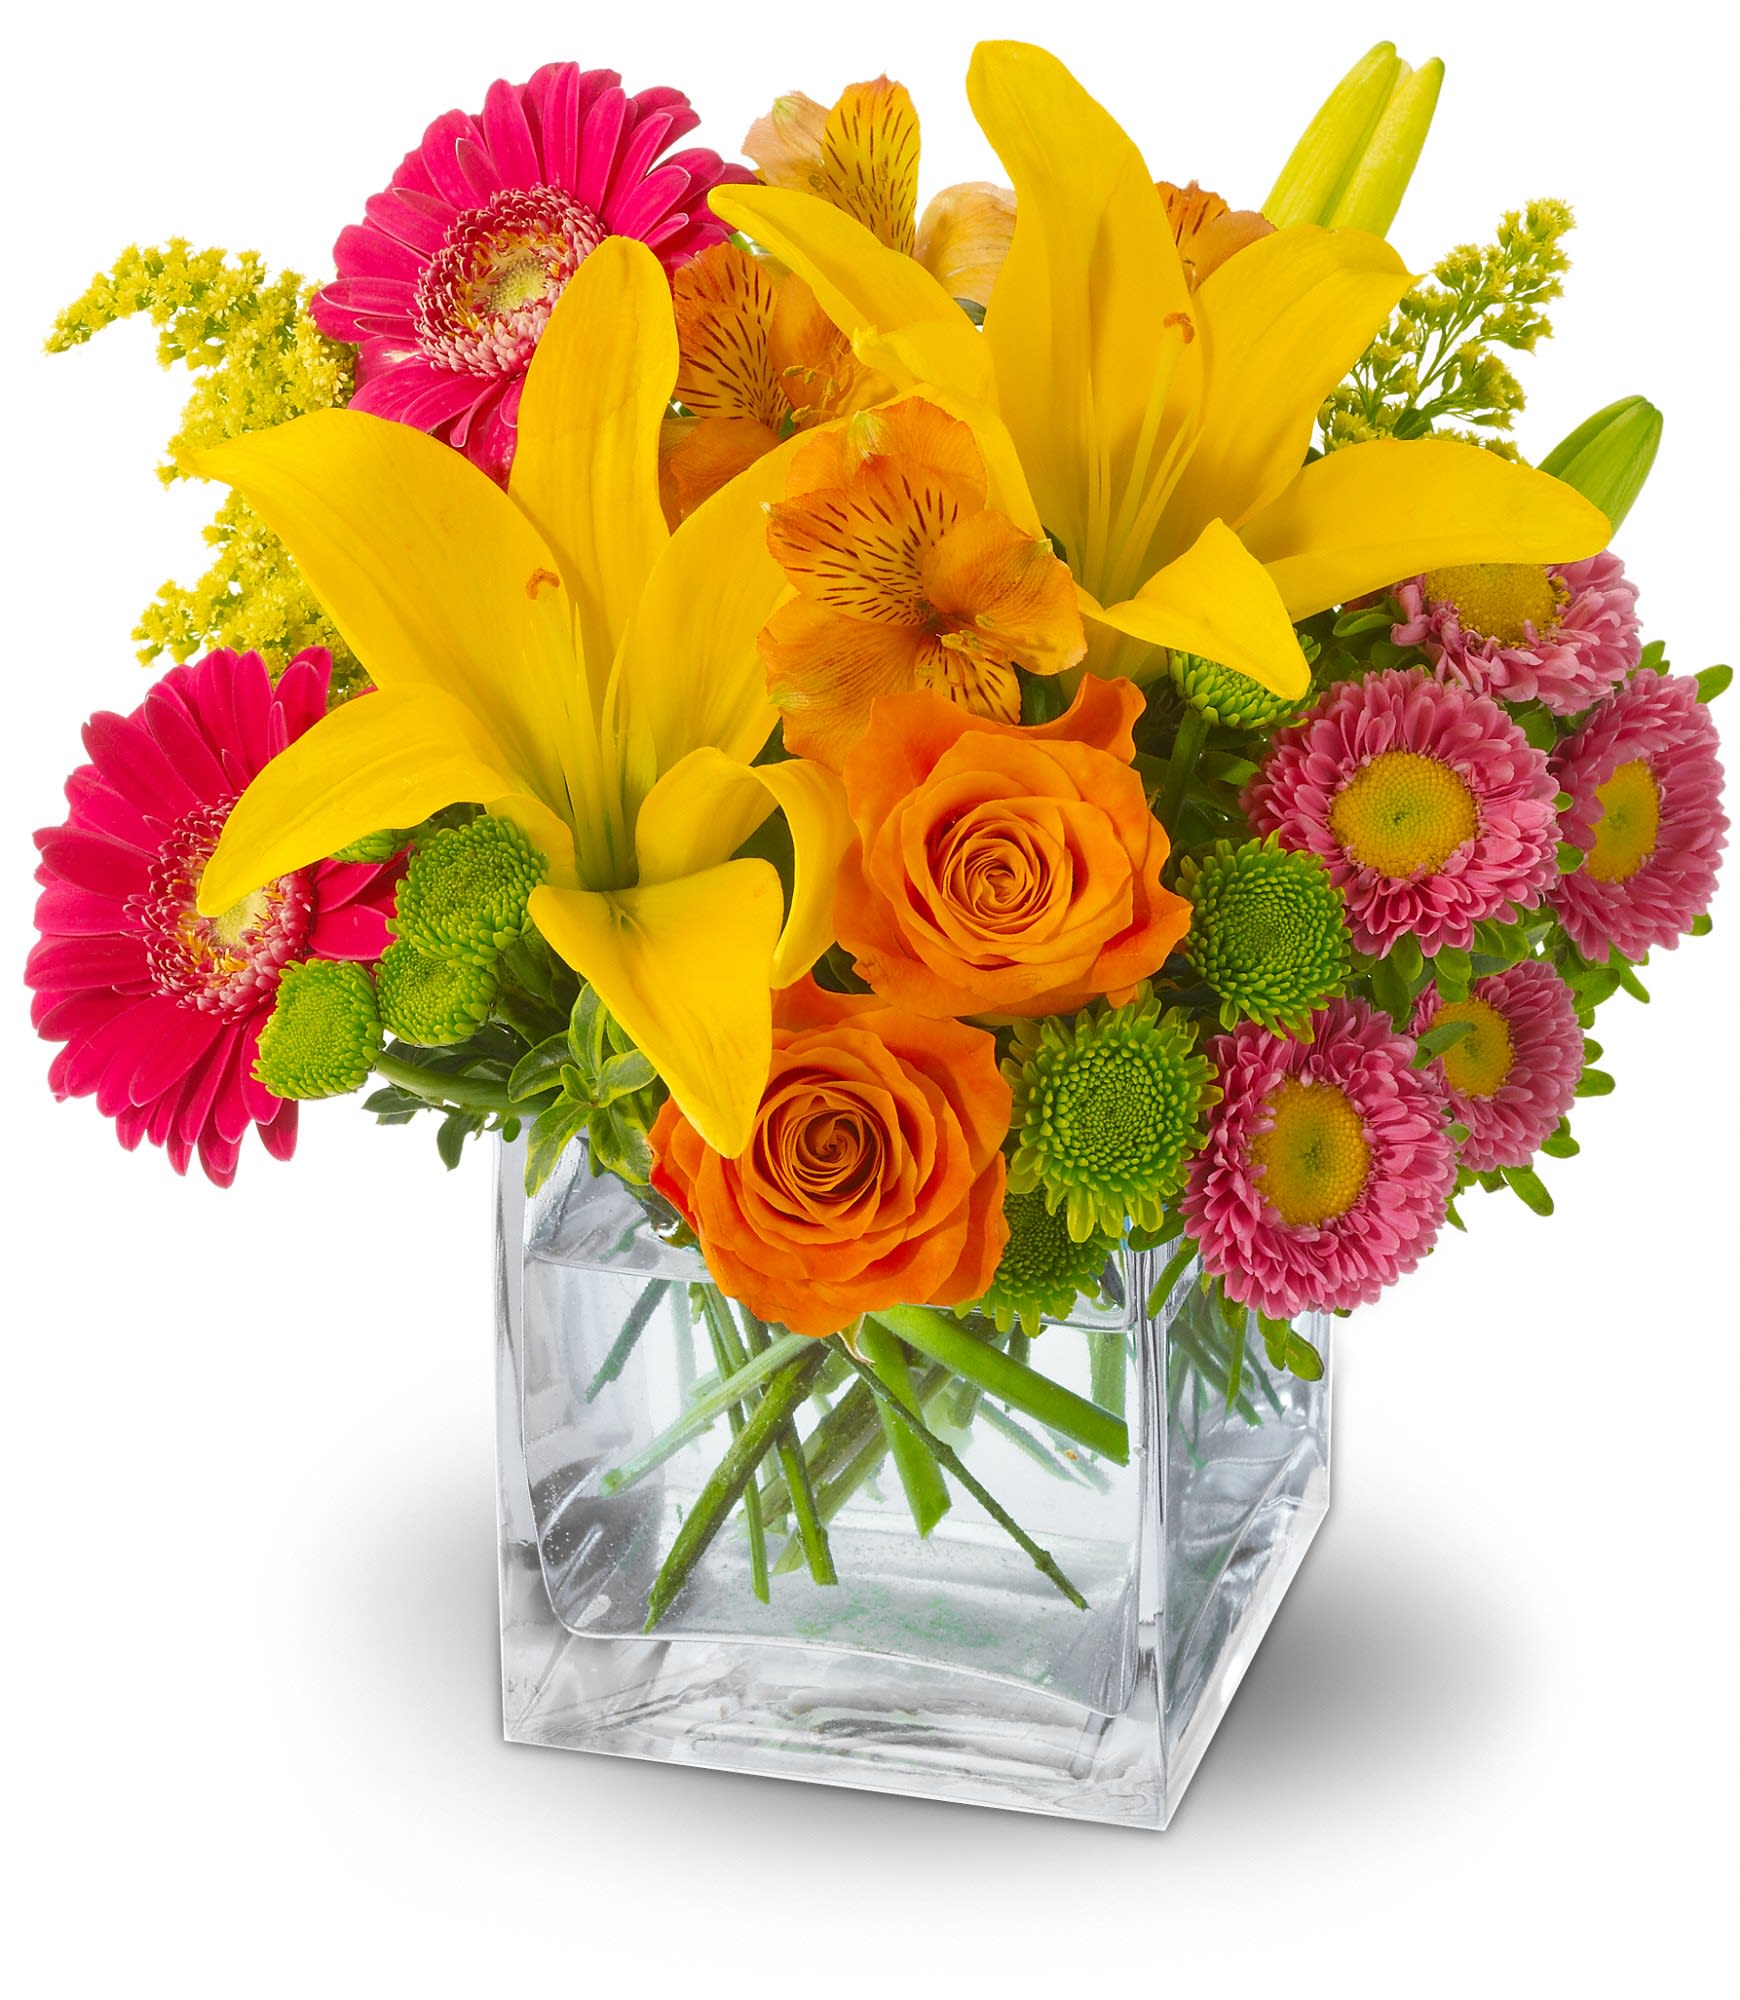 Summertime Splash - Make a summertime splash with this pop art mix of yellow, hot pink, orange and green blossoms, presented in a modern glass cube vase - and bring warm-weather fun to someone's day! 